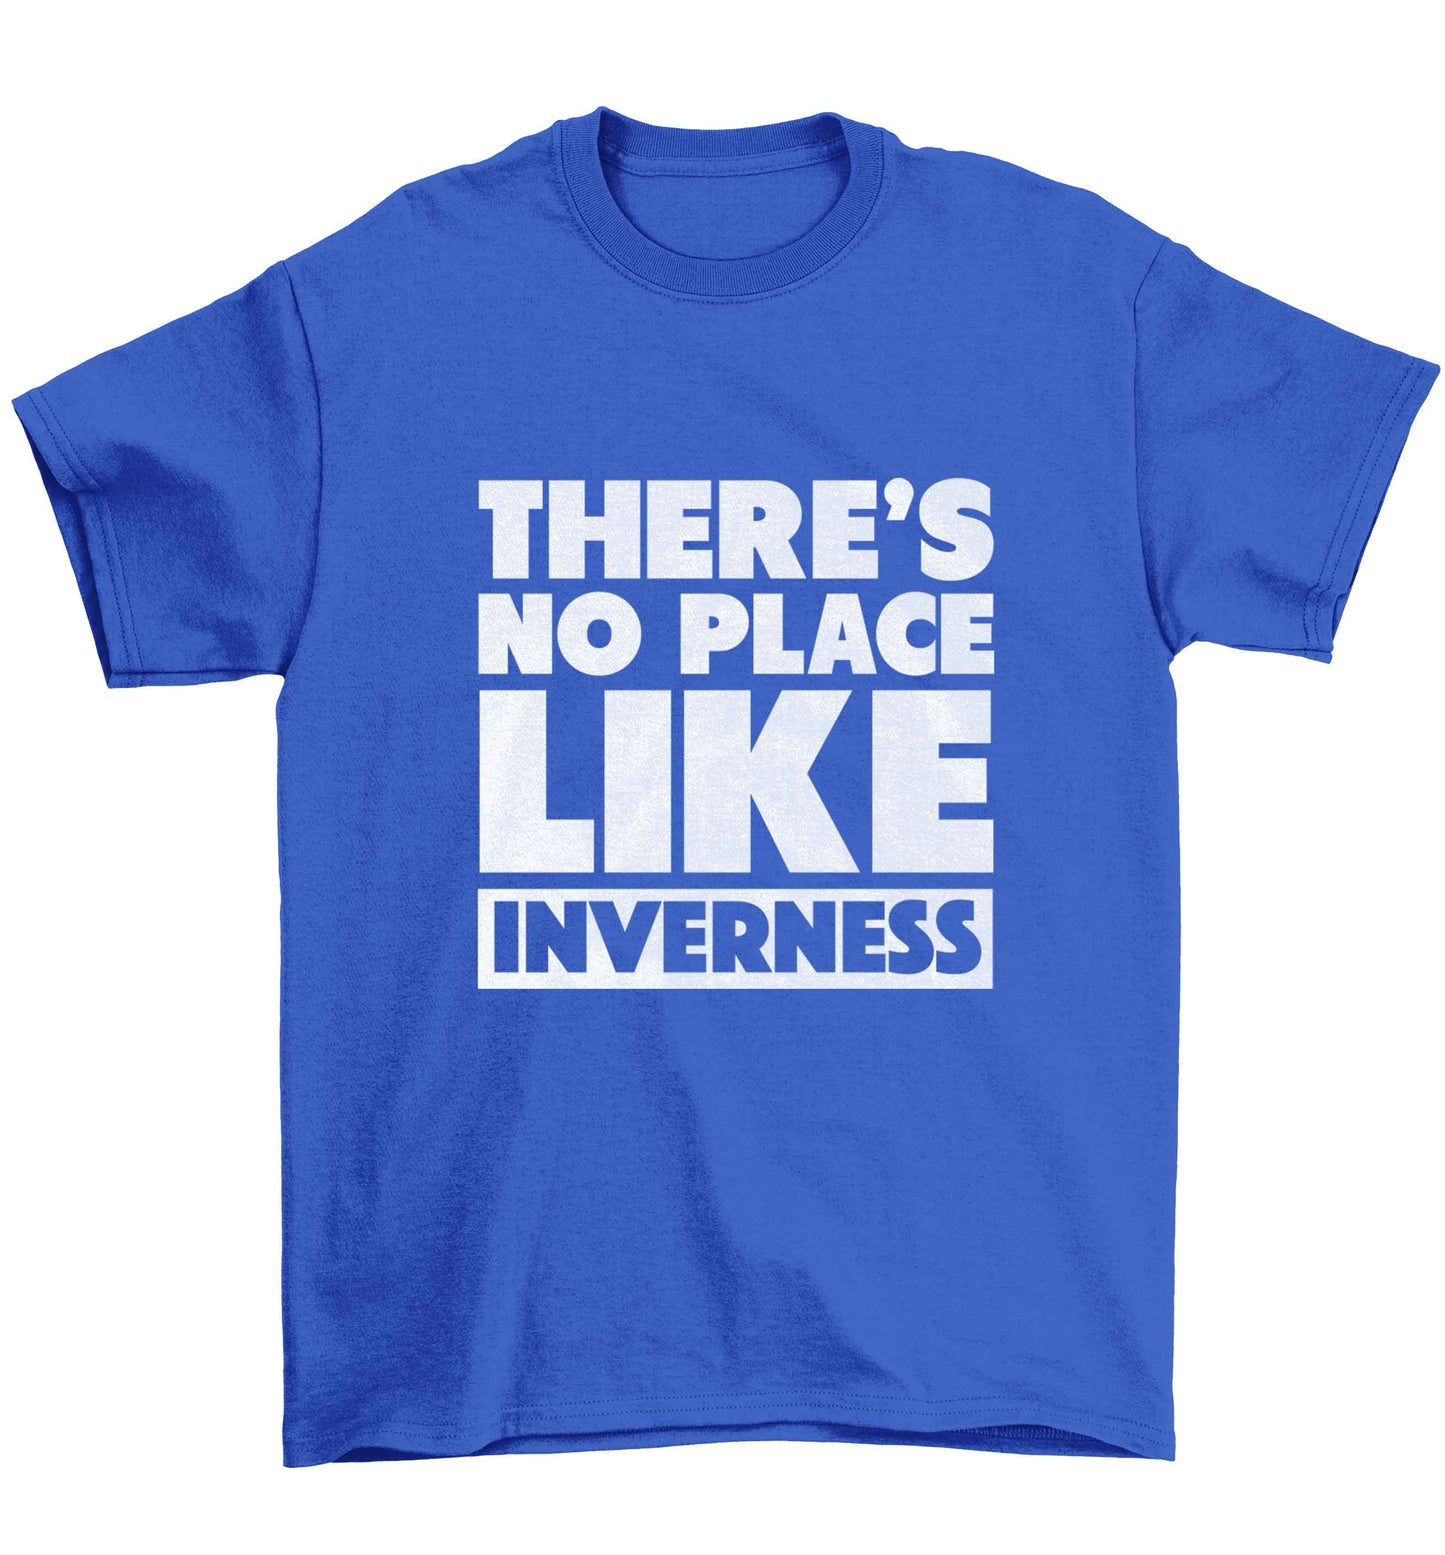 There's no place like Inverness Children's blue Tshirt 12-13 Years